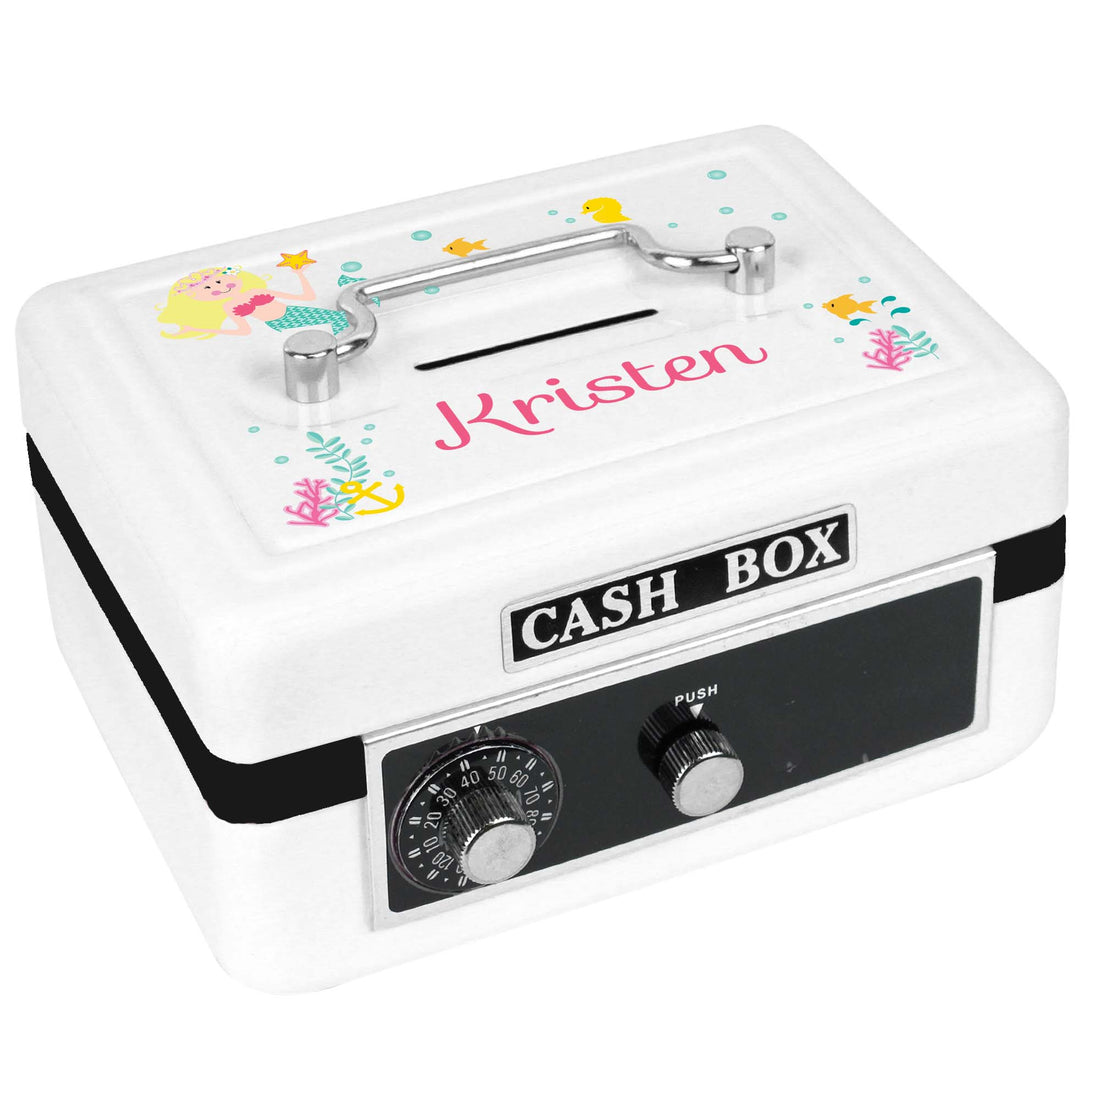 Personalized White Cash Box with Blonde Mermaid Princess design